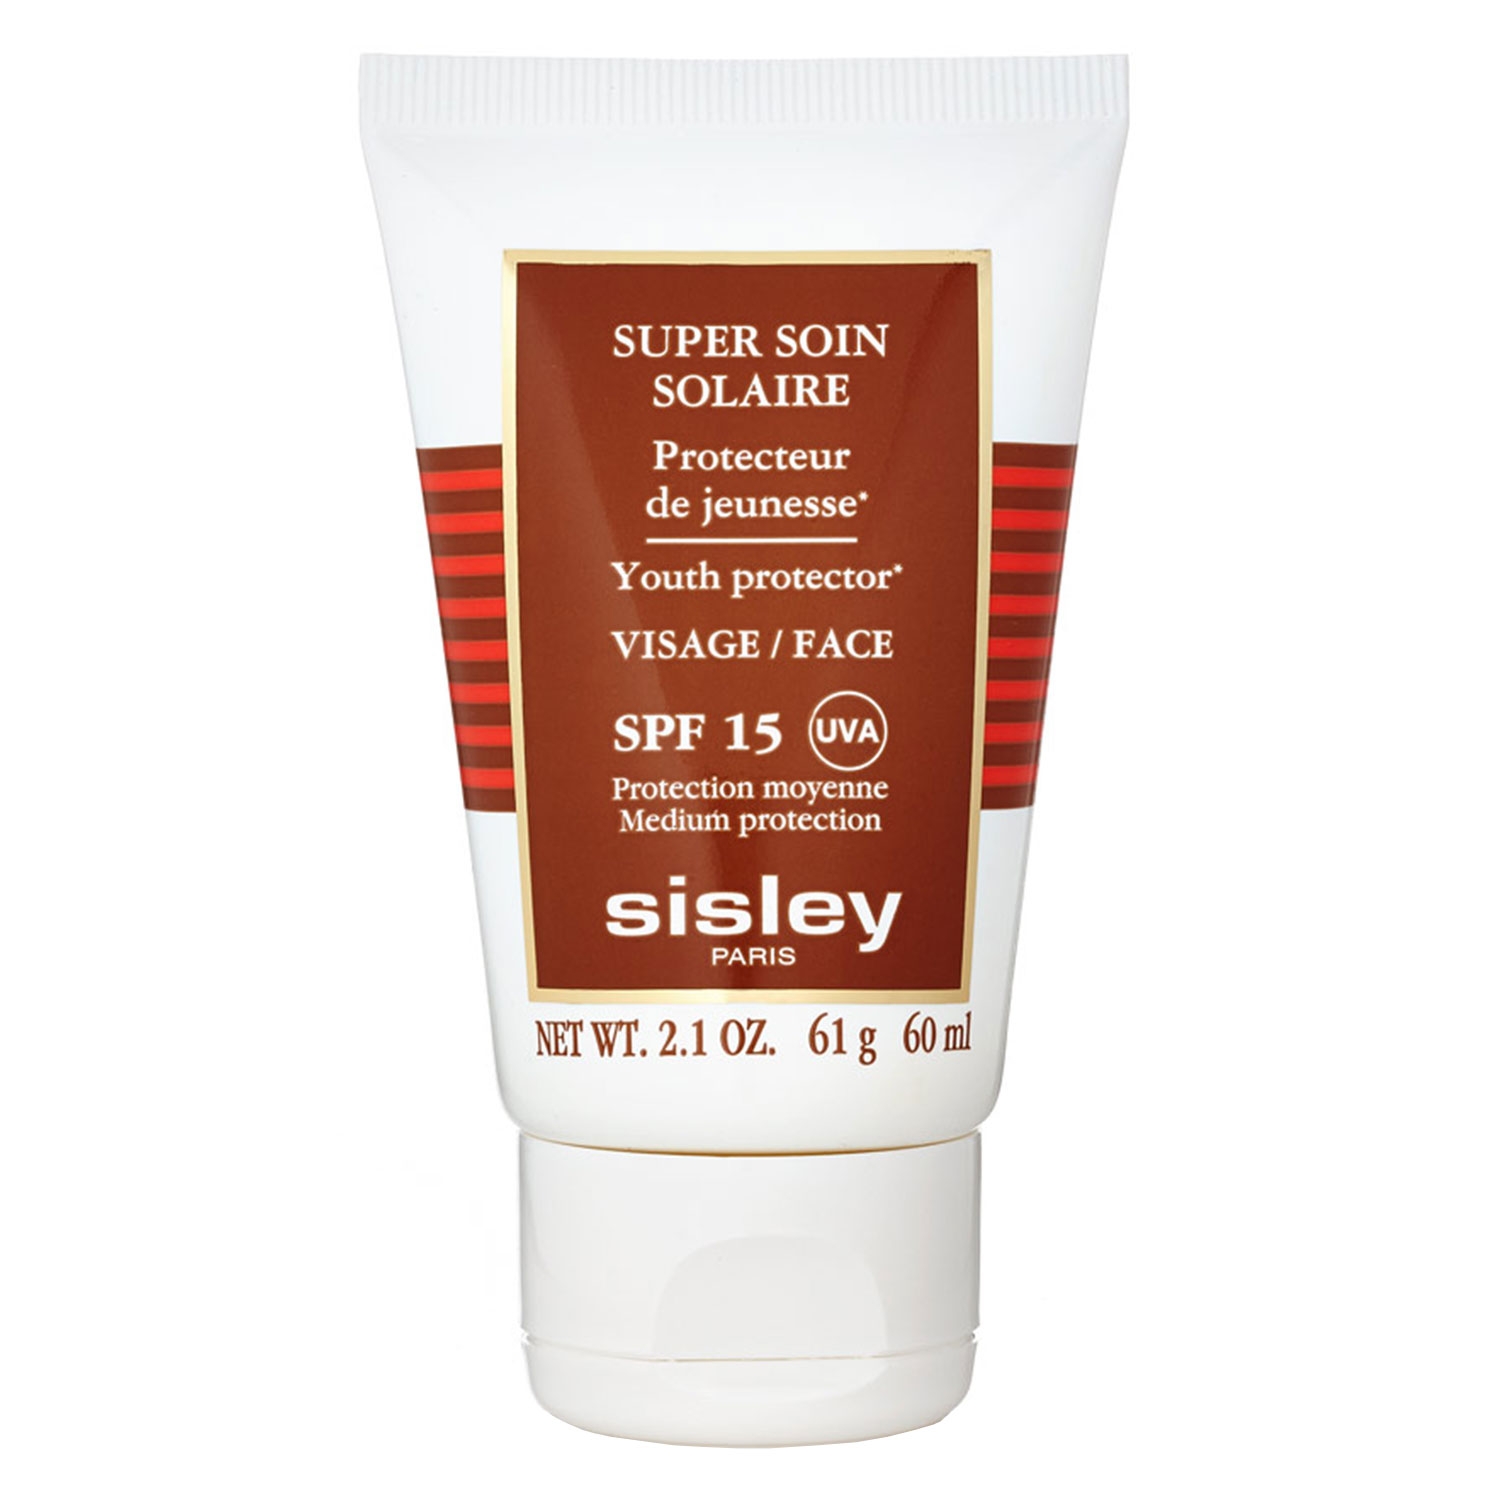 Product image from Super Soin - Solaire Visage SPF15